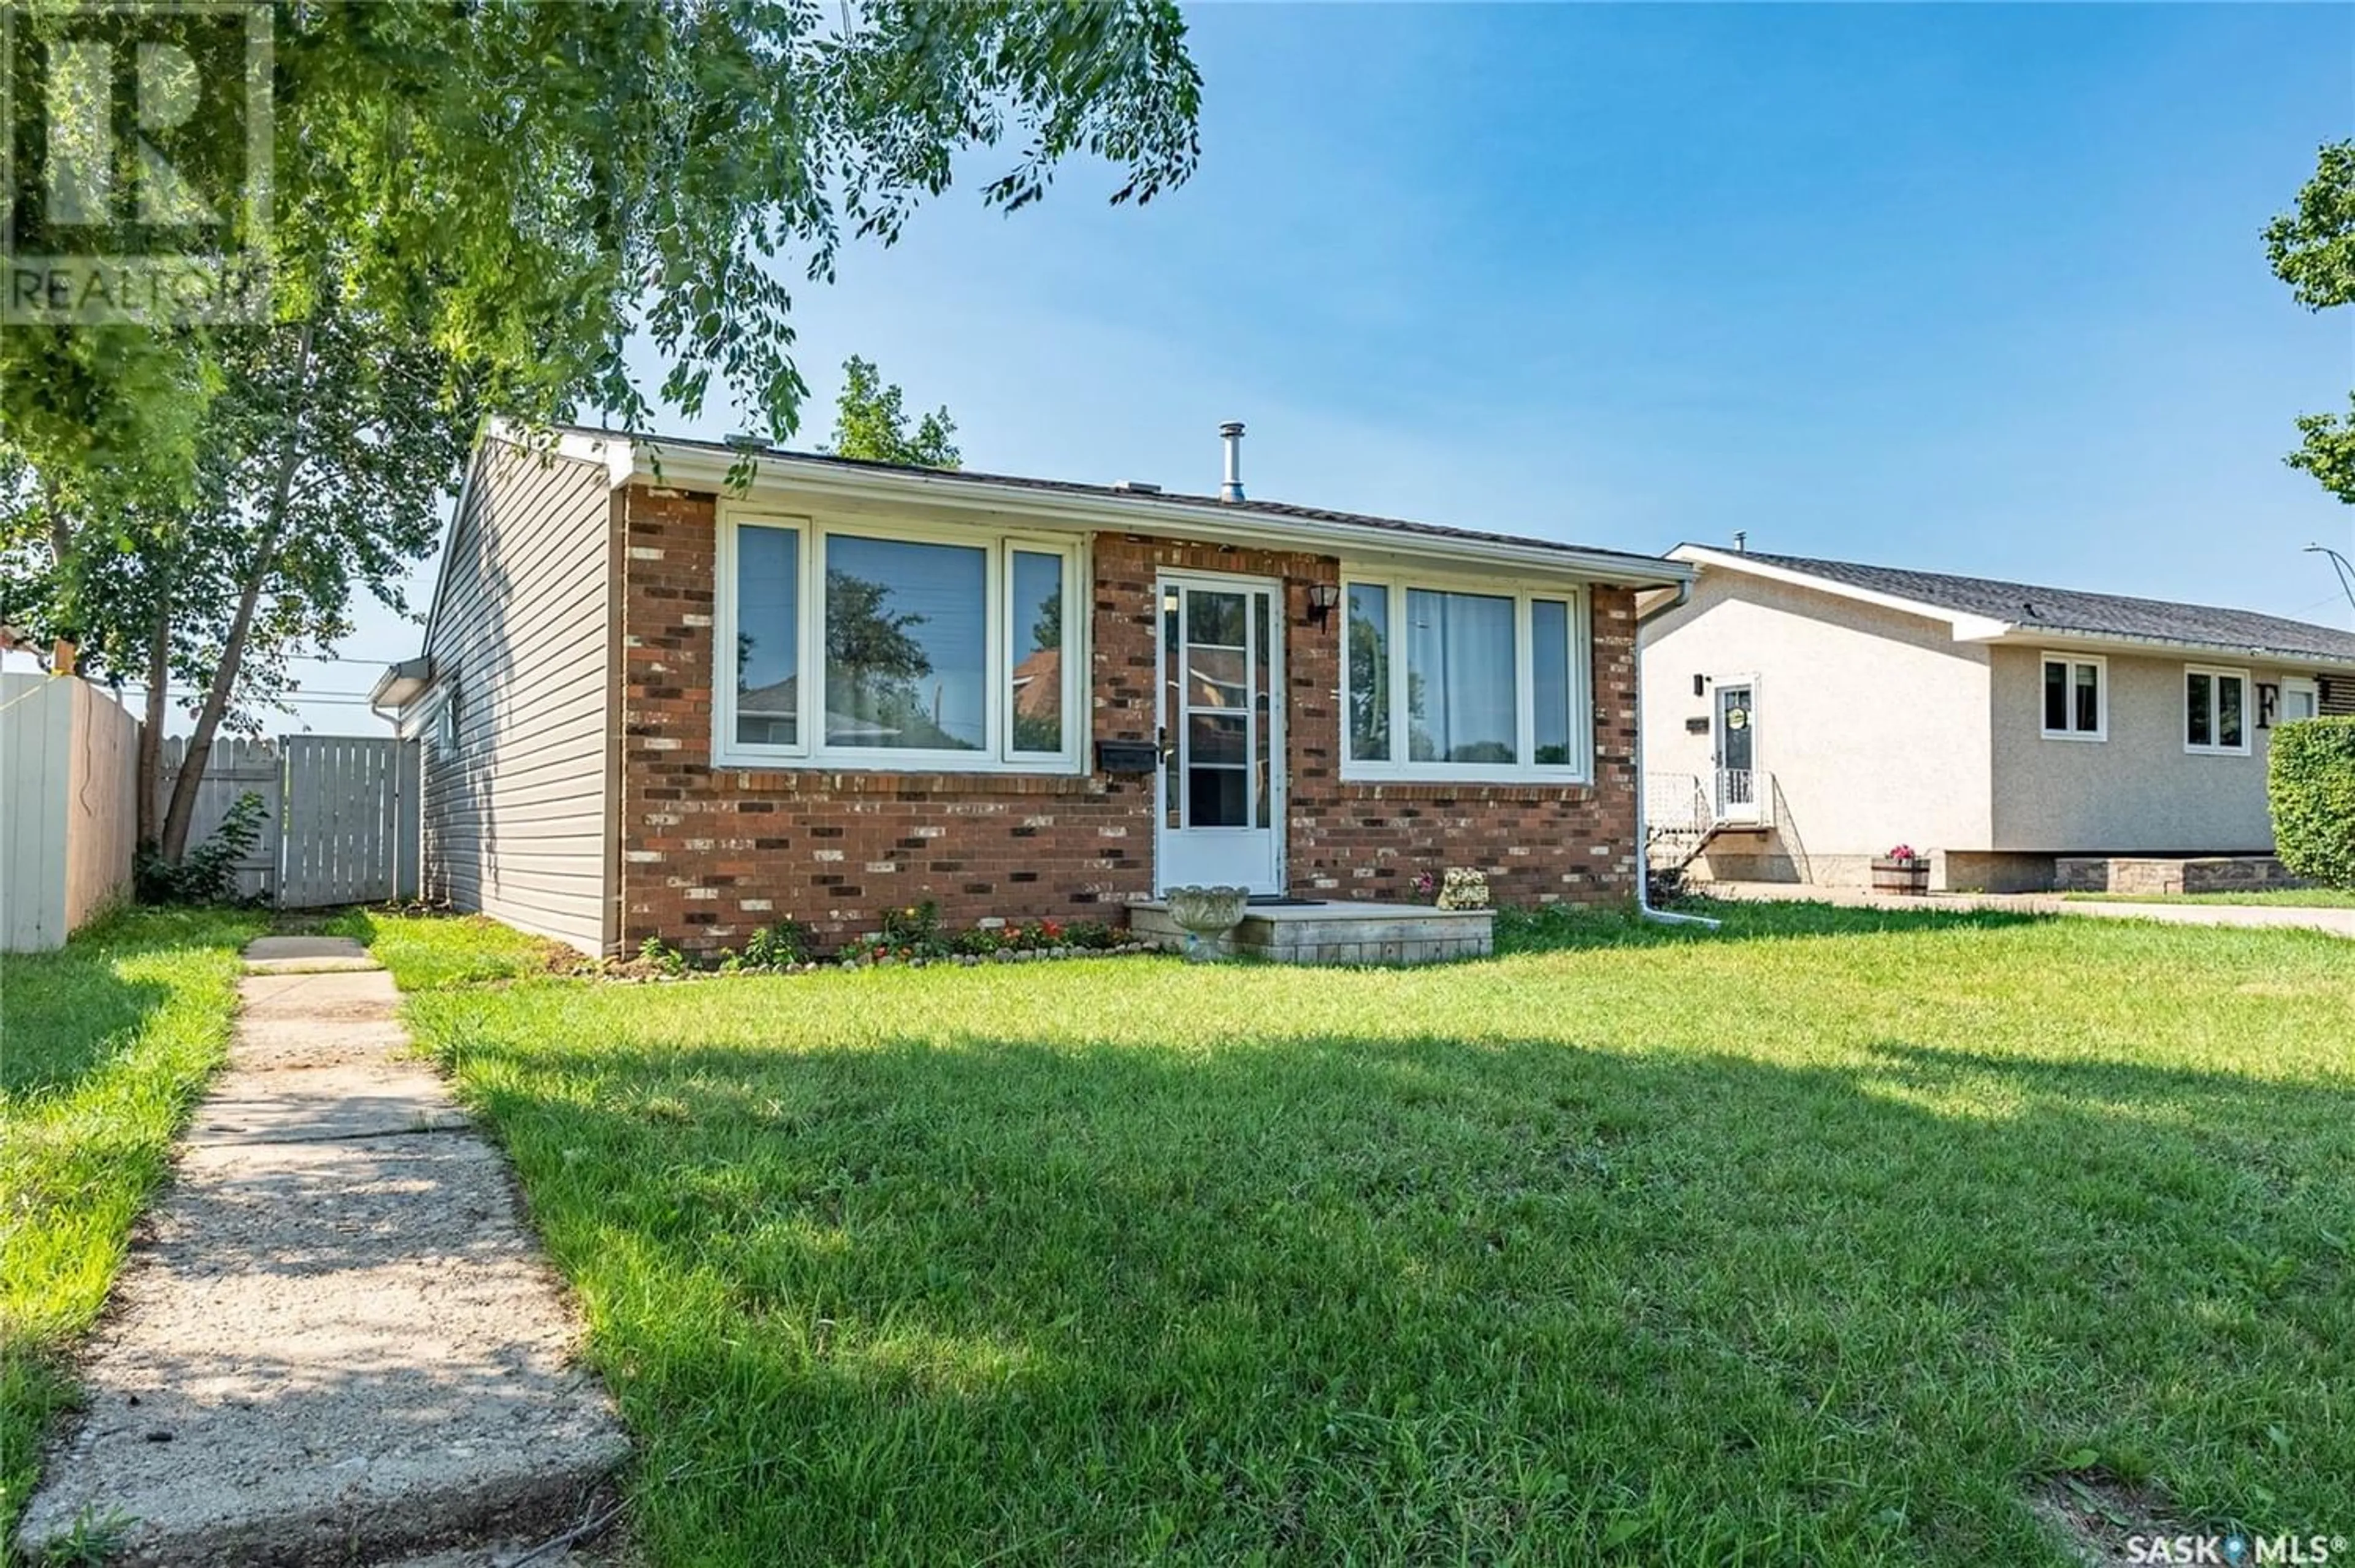 Home with brick exterior material for 1007 Ominica STREET E, Moose Jaw Saskatchewan S6H0J4